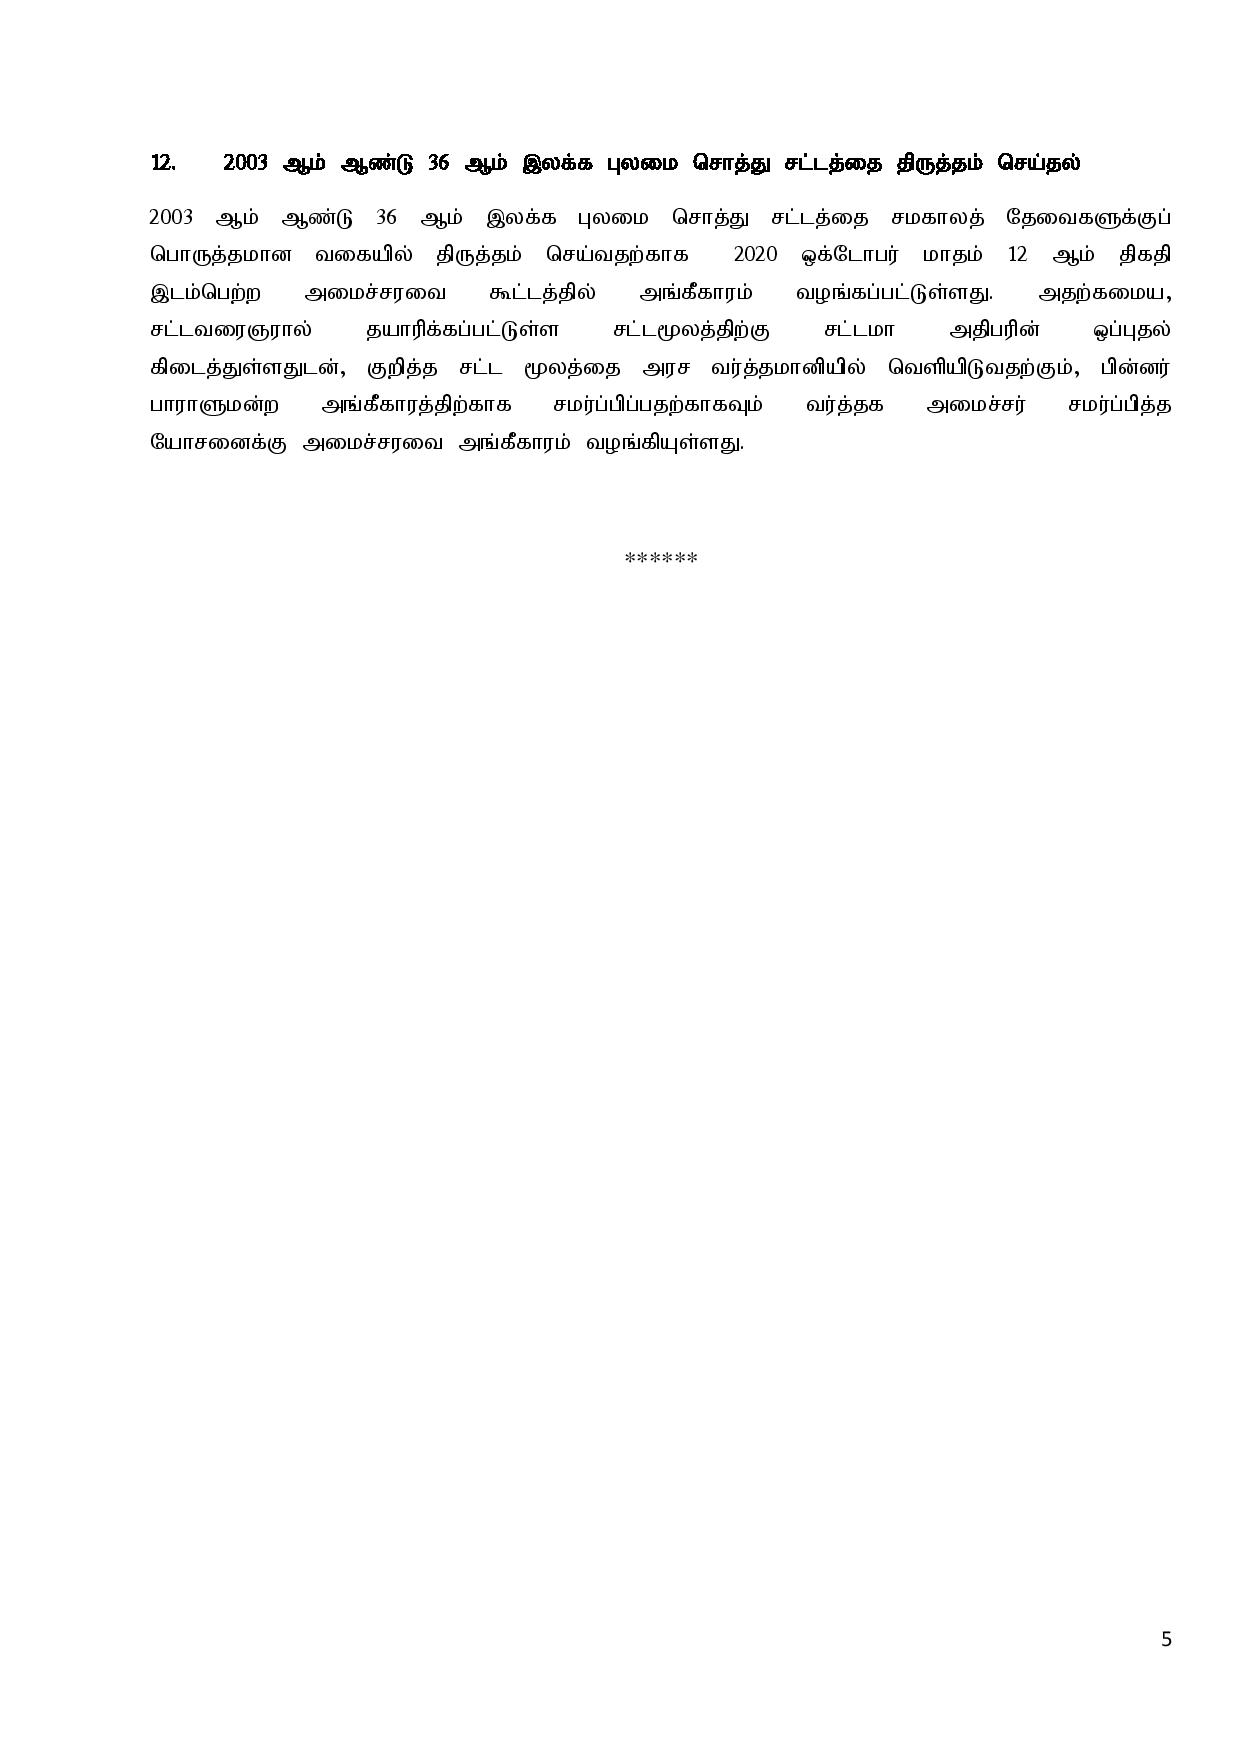 Cabinet Decisions on 18.01.2022 Tamil page 005